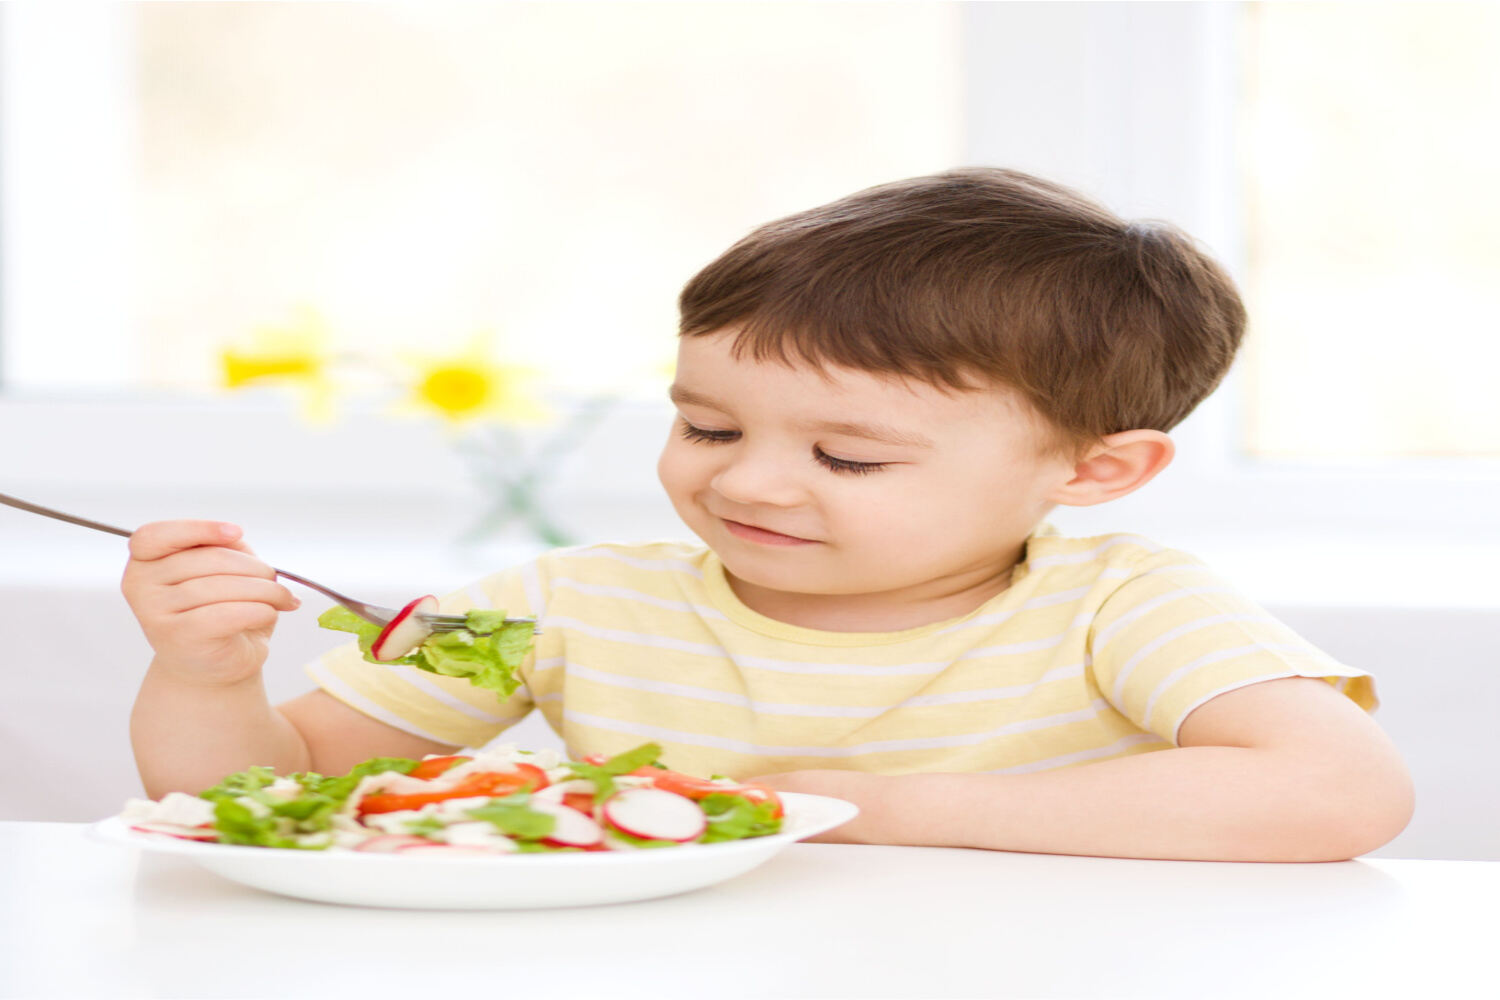 Make toddler eat vegetables by including it in every meal